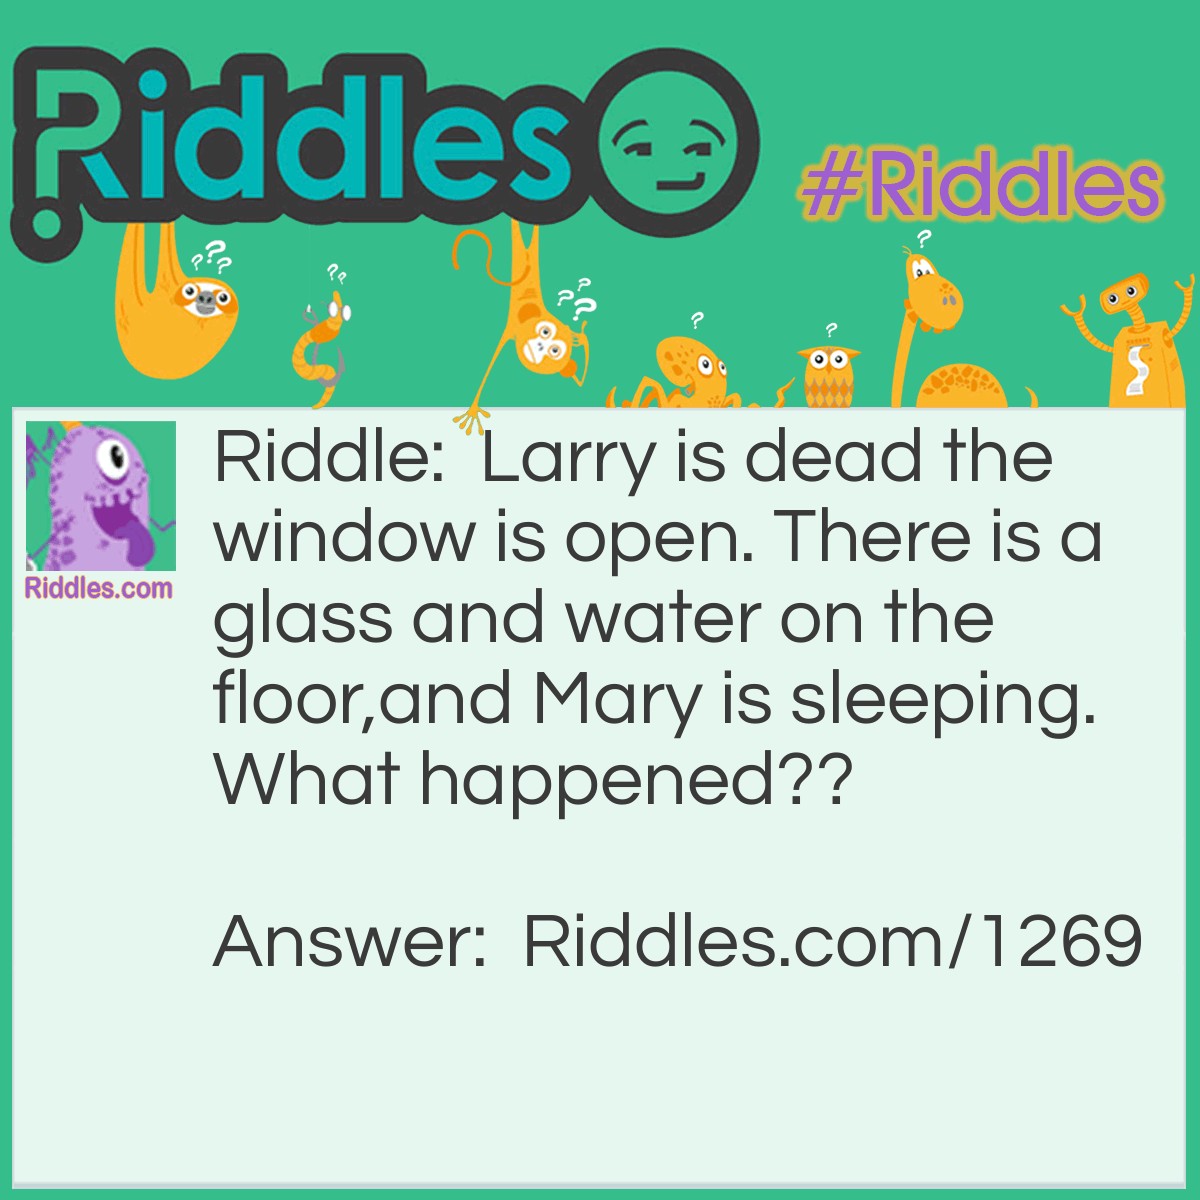 Riddle: Larry is dead the window is open. There is a glass and water on the floor, and Mary is sleeping.
What happened? Answer: Larry is a fish. the breeze from the window knocked over his fishbowl it broke and he died from no water.